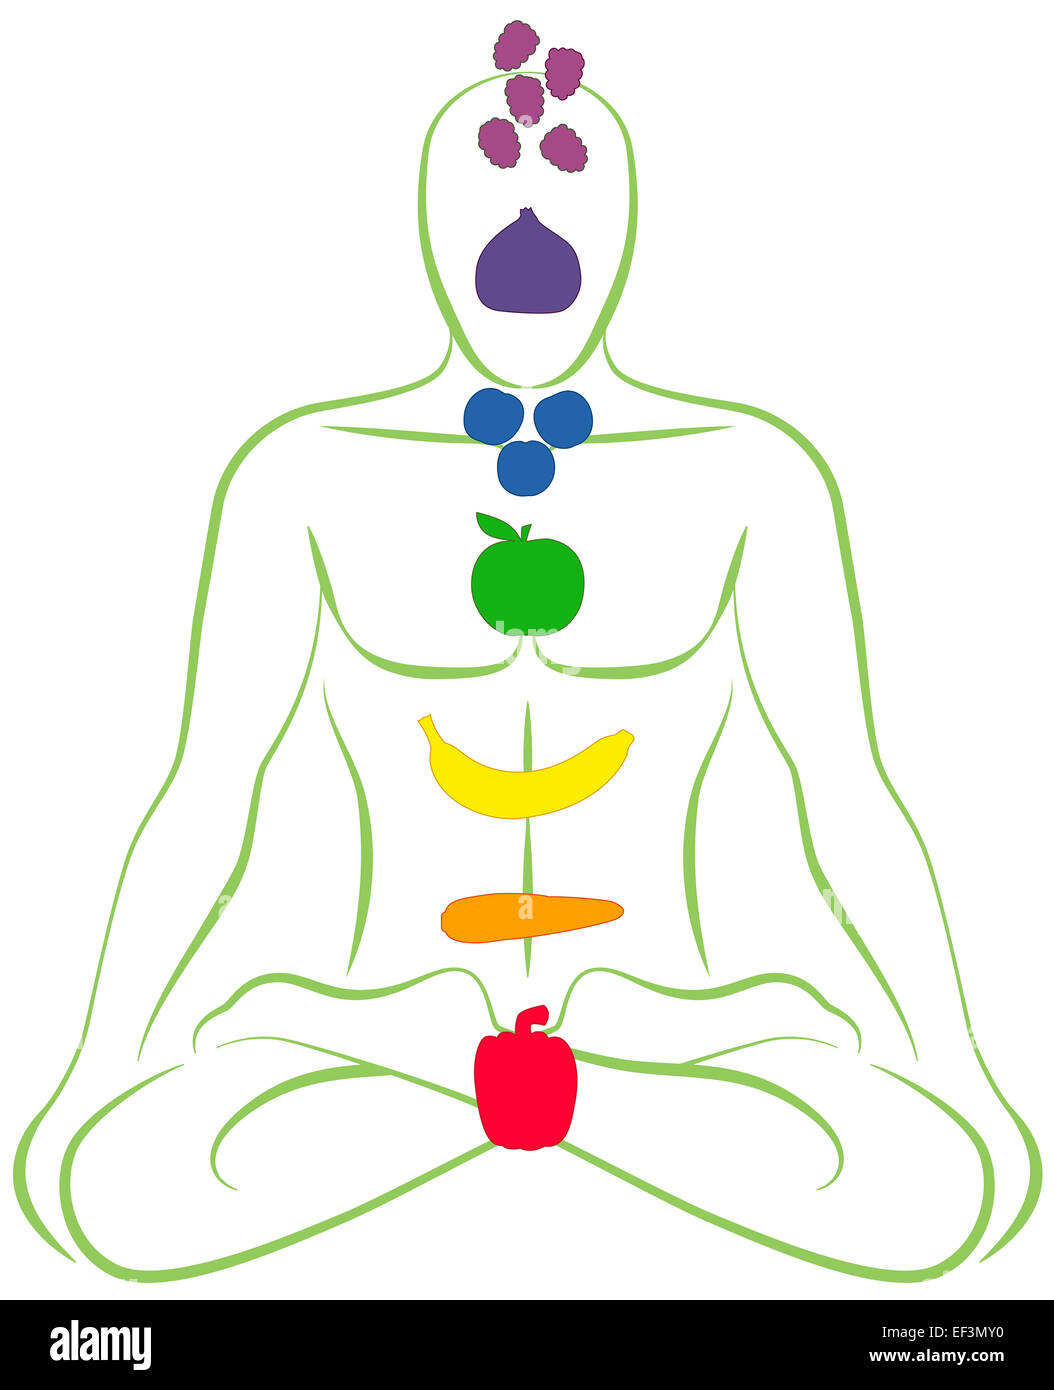 Meditating man with fruits and vegetables instead of his seven body chakras. Stock Photo